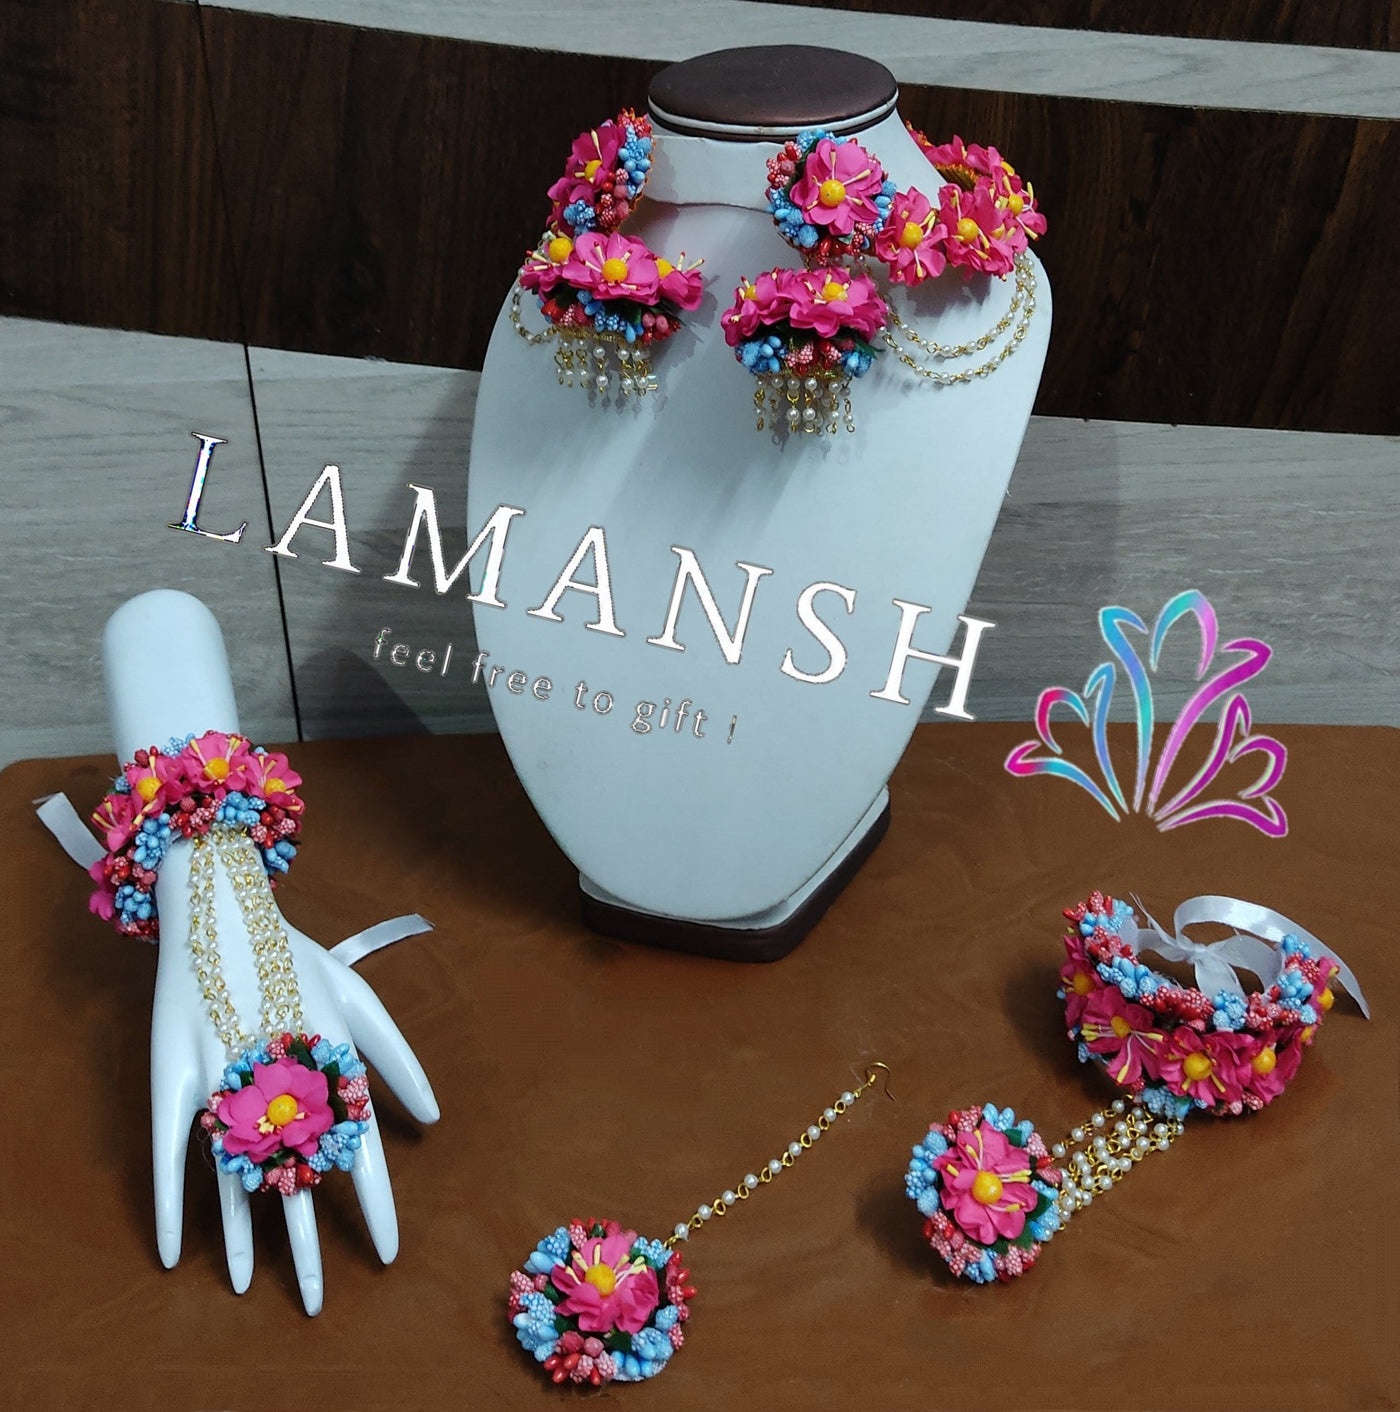 Lamansh Flower 🌺 Jewellery 2 Earrings with side chain to hair , 1 Maangtika & 2 Bracelets Attached with ring / Dark Pink - Blue - Yellow - Red LAMANSH® Flower Jewellery Set For Haldi Mehendi ceremomy / Gorgeous 🌺 Floral Set